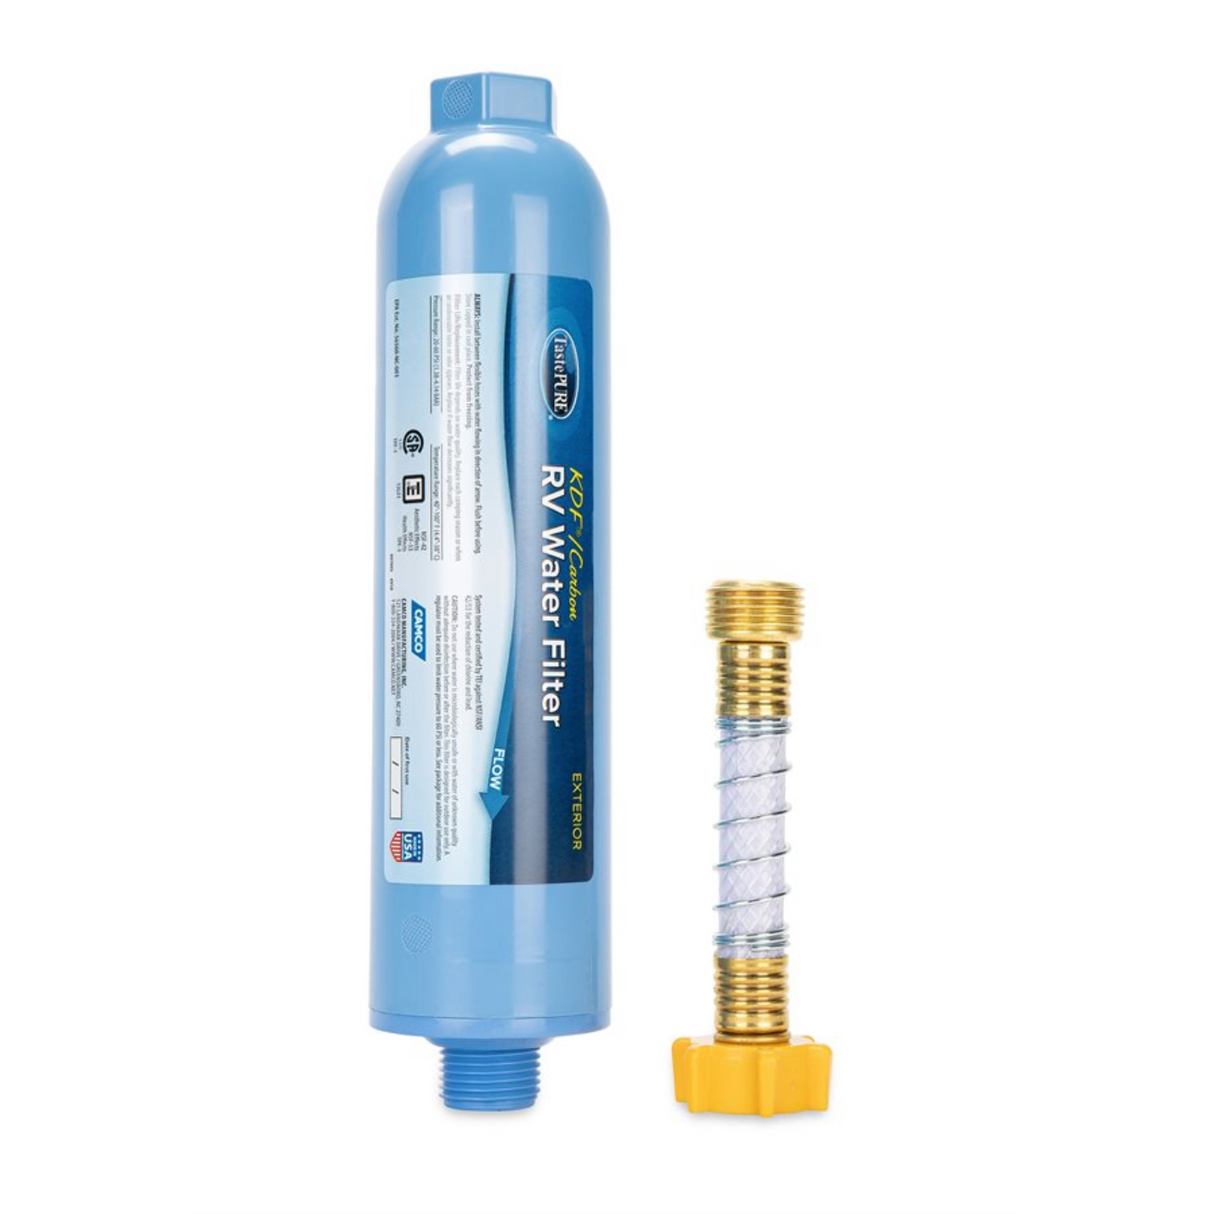 TastePURE KDF RV Water Filter with Flexible Hose Protector